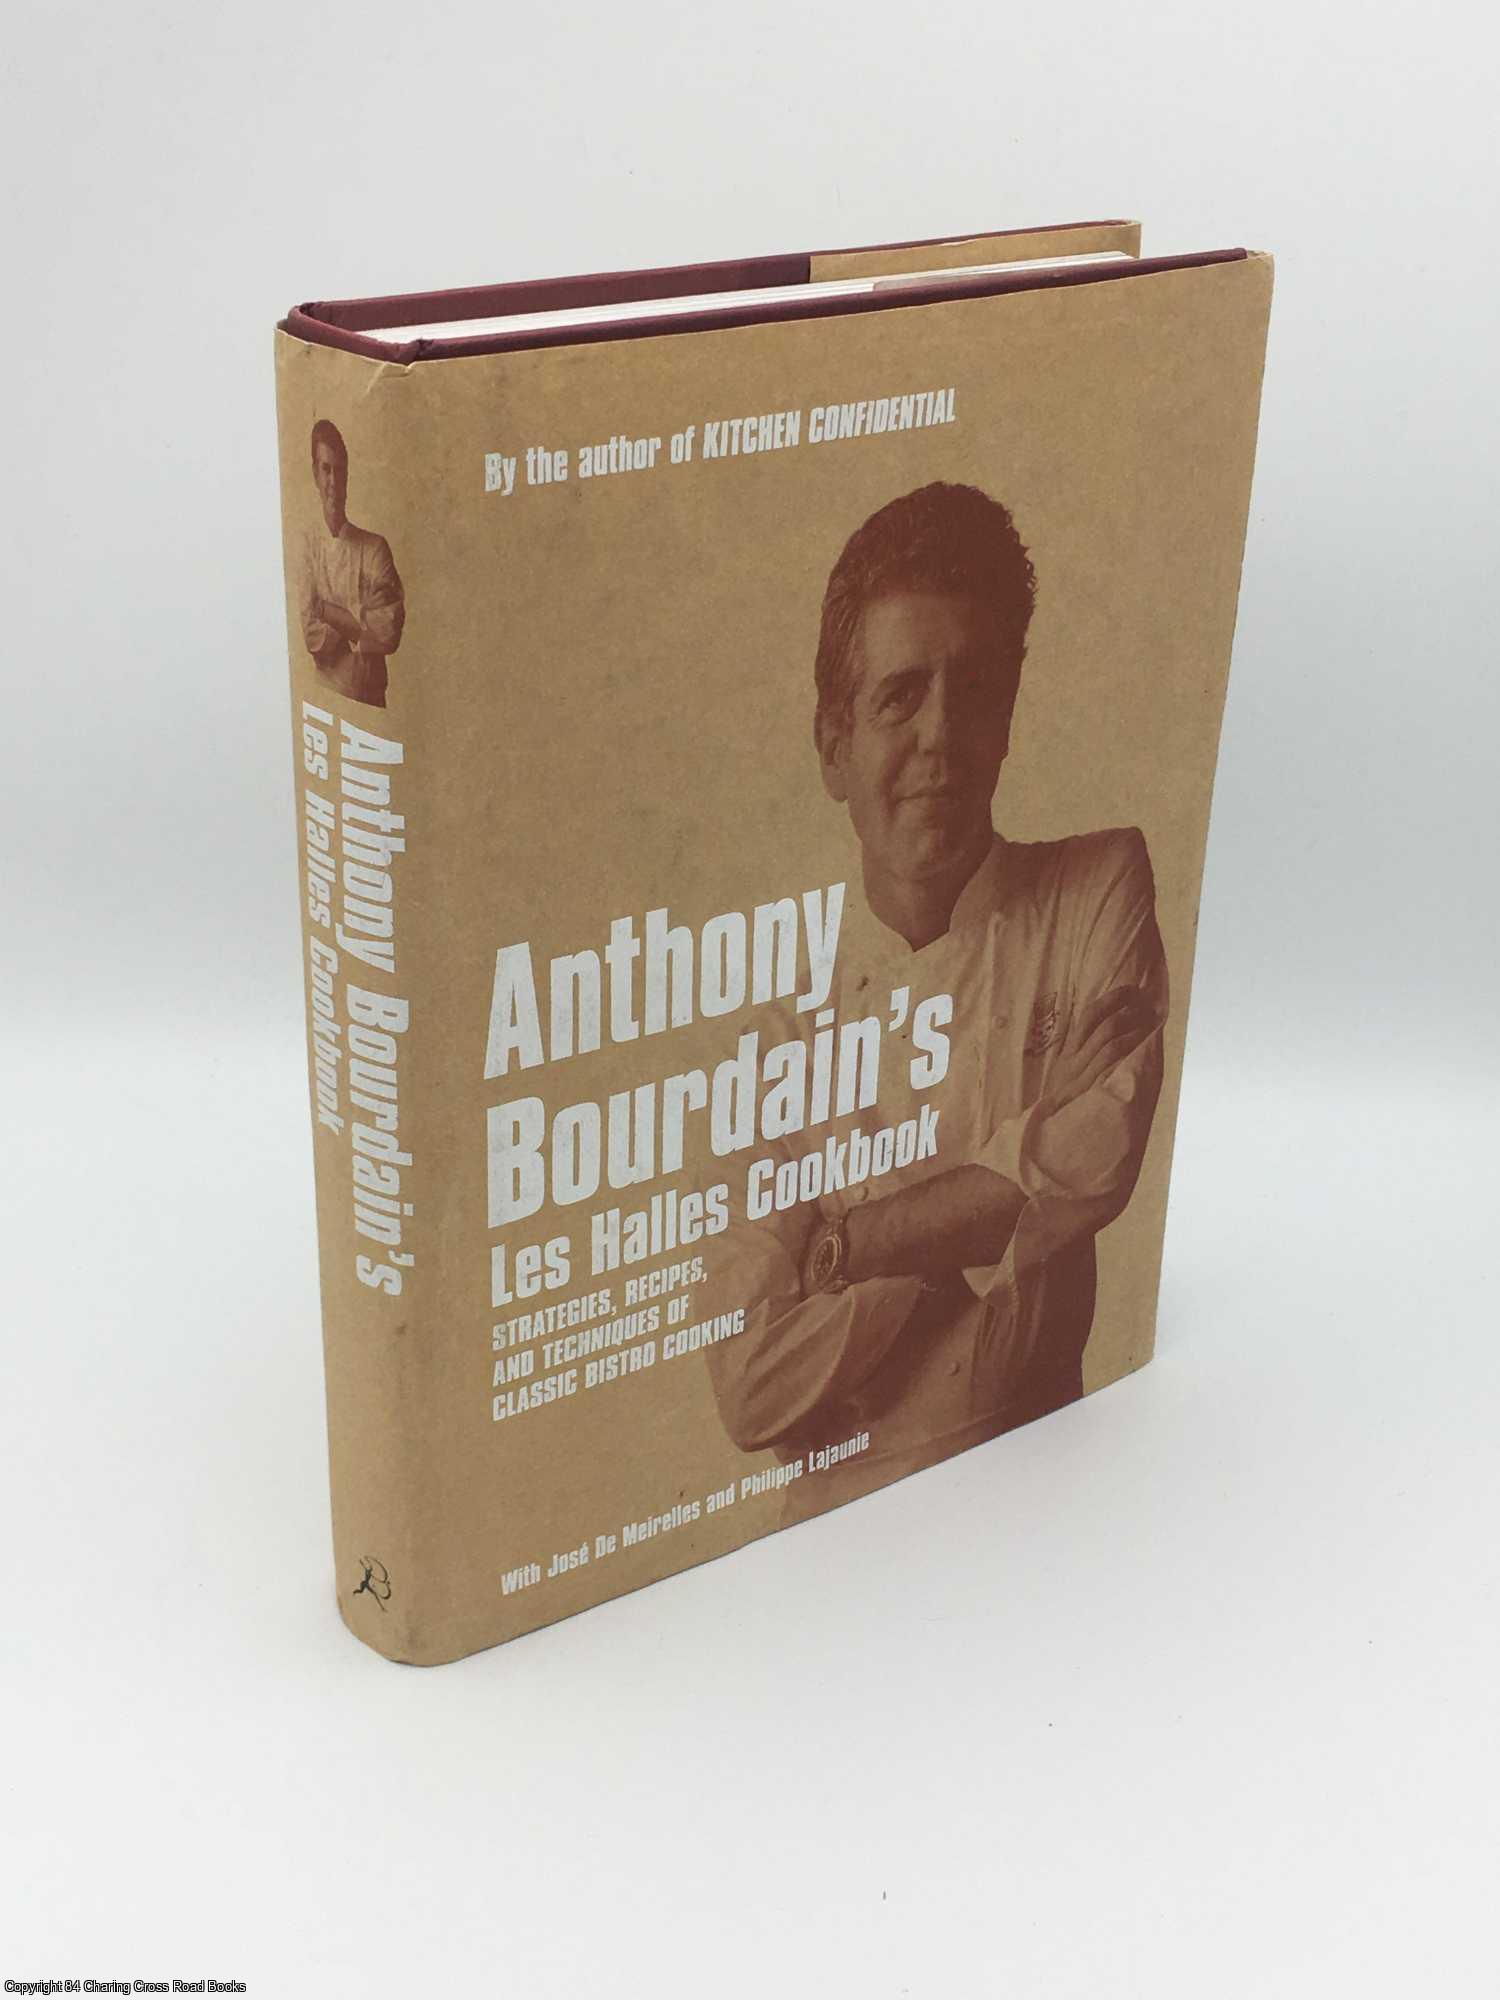 Bourdain, Anthony - Anthony Bourdain's Les Halles Cookbook: Strategies, Recipes, and Techniques of Classic Bistro Cooking